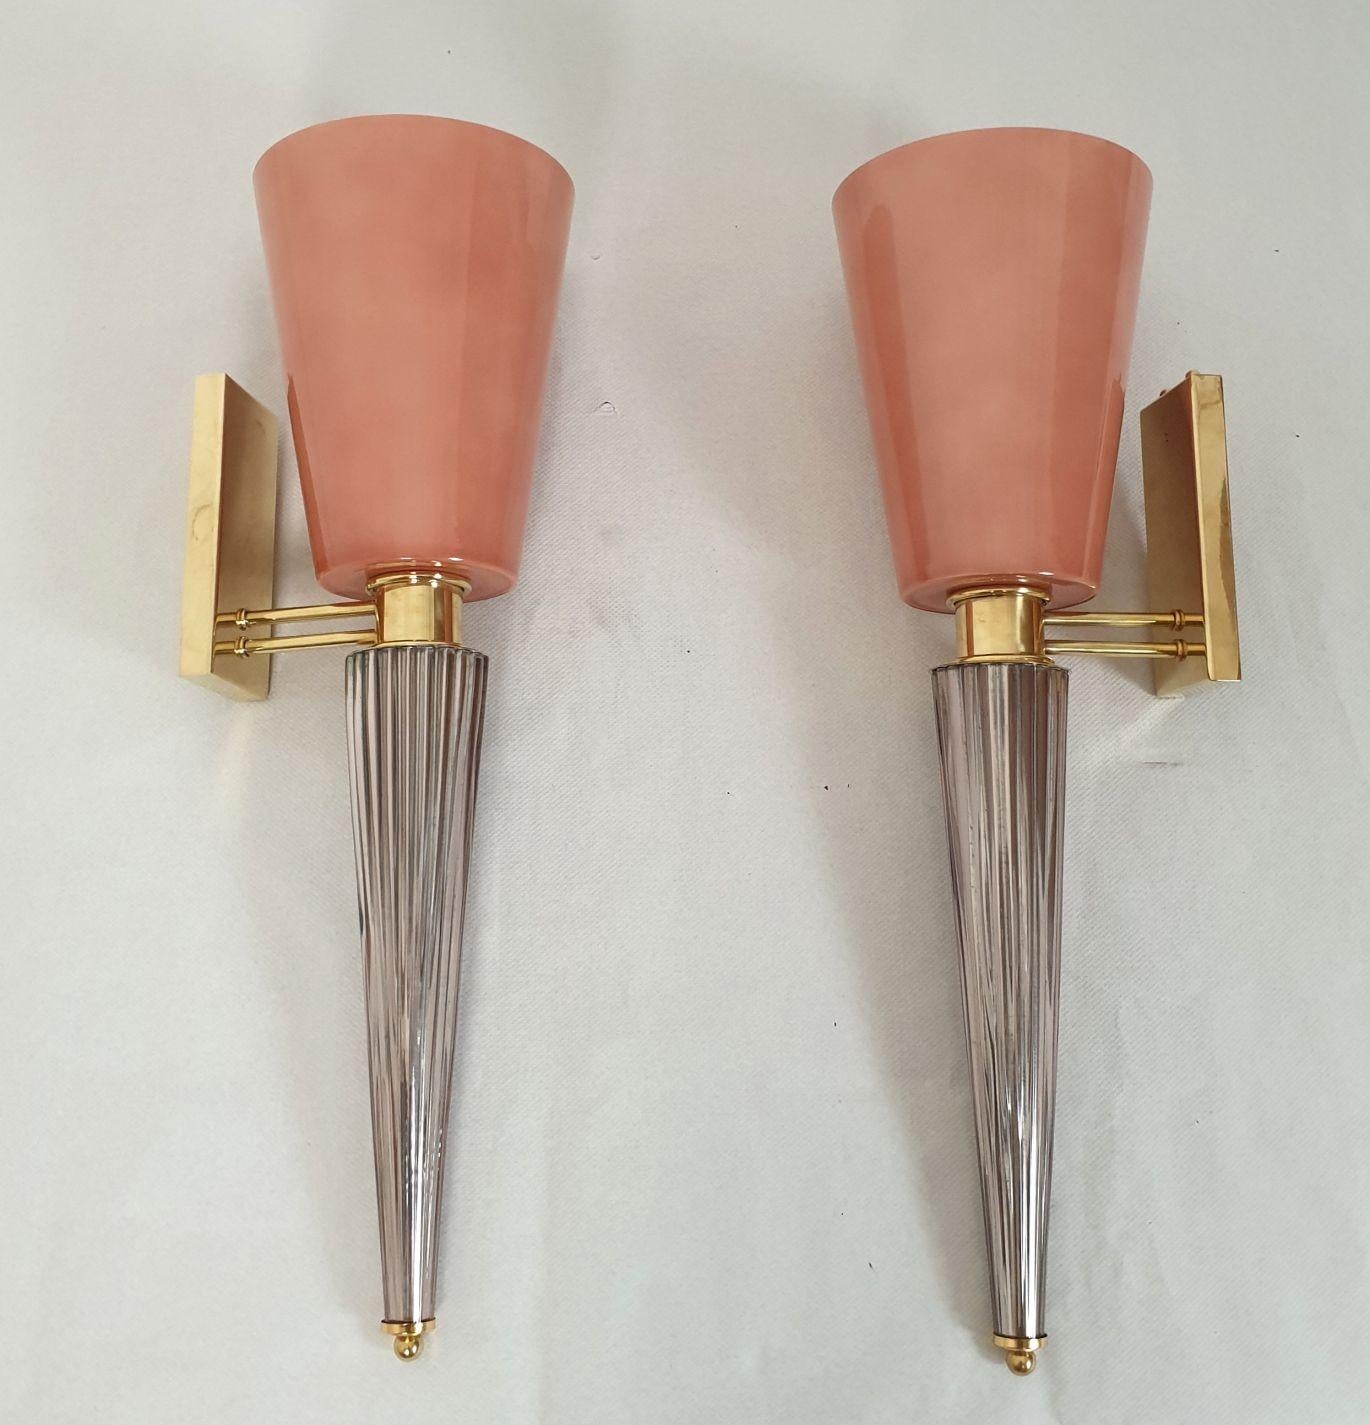 Pair of very tall Murano glass wall sconces, Attributed to Venini, Italy 1970s.
The Mid-Century Modern sconces are made of a top salmon pink Murano glass vase nesting the light bulb.
The glass is double layered: the inside is white. It's